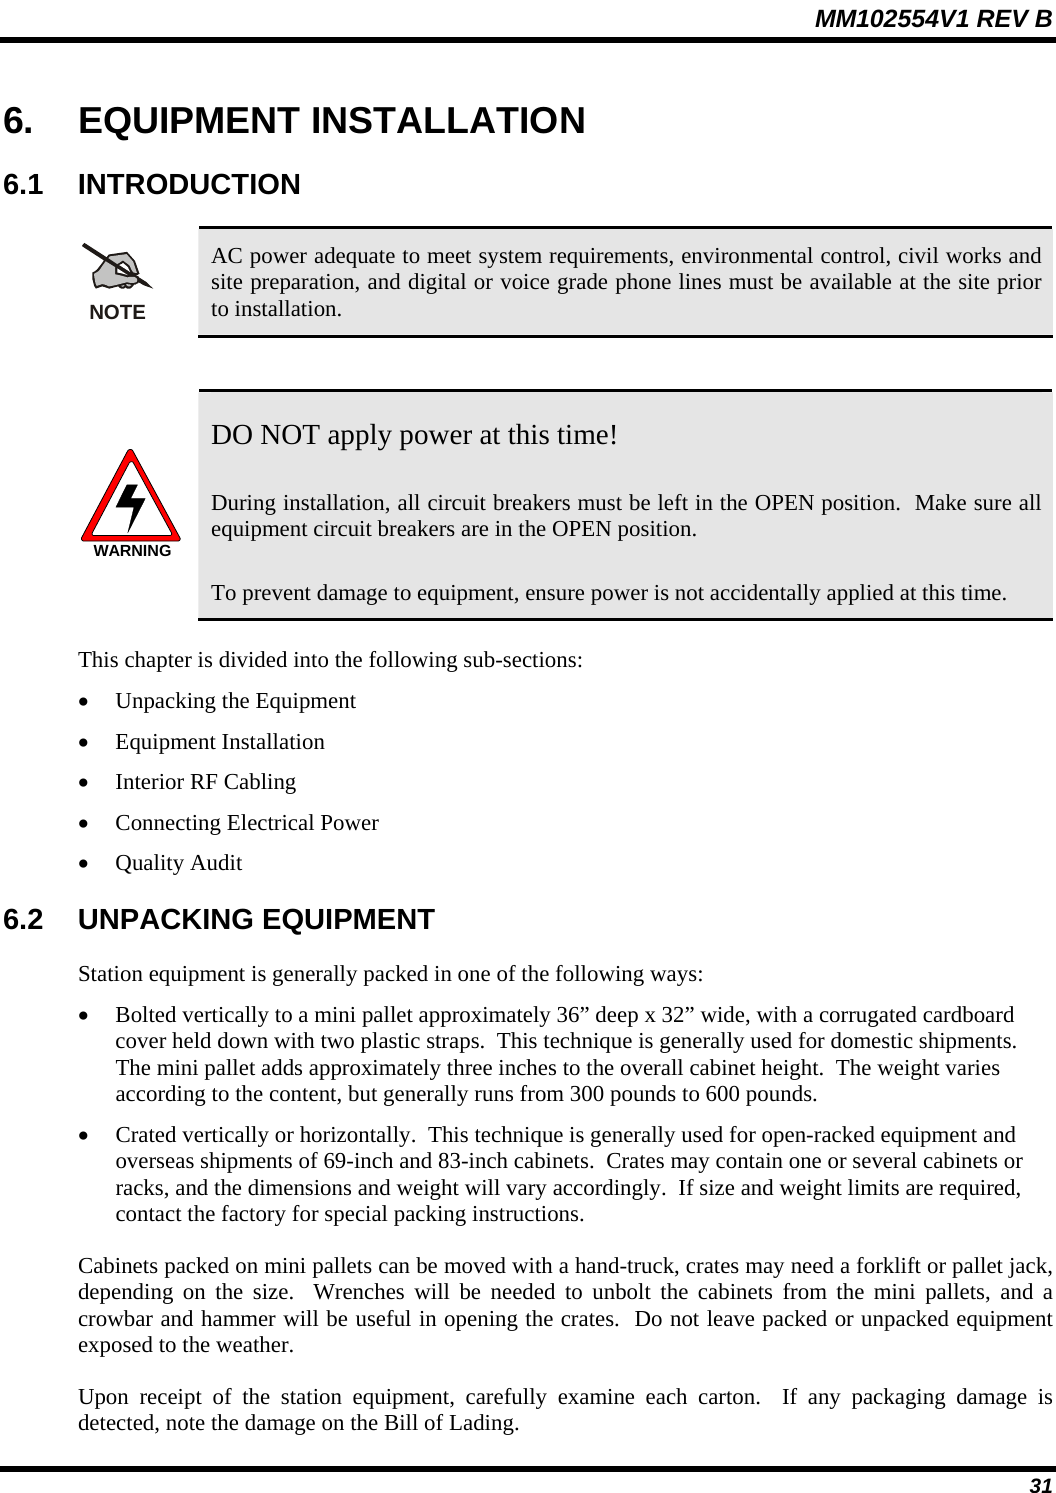 MM102554V1 REV B  31 6. EQUIPMENT INSTALLATION 6.1 INTRODUCTION NOTE AC power adequate to meet system requirements, environmental control, civil works and site preparation, and digital or voice grade phone lines must be available at the site prior to installation.  WARNING DO NOT apply power at this time! During installation, all circuit breakers must be left in the OPEN position.  Make sure all equipment circuit breakers are in the OPEN position.   To prevent damage to equipment, ensure power is not accidentally applied at this time.  This chapter is divided into the following sub-sections: • Unpacking the Equipment • Equipment Installation  • Interior RF Cabling • Connecting Electrical Power • Quality Audit 6.2 UNPACKING EQUIPMENT Station equipment is generally packed in one of the following ways: • Bolted vertically to a mini pallet approximately 36” deep x 32” wide, with a corrugated cardboard cover held down with two plastic straps.  This technique is generally used for domestic shipments.  The mini pallet adds approximately three inches to the overall cabinet height.  The weight varies according to the content, but generally runs from 300 pounds to 600 pounds. • Crated vertically or horizontally.  This technique is generally used for open-racked equipment and overseas shipments of 69-inch and 83-inch cabinets.  Crates may contain one or several cabinets or racks, and the dimensions and weight will vary accordingly.  If size and weight limits are required, contact the factory for special packing instructions. Cabinets packed on mini pallets can be moved with a hand-truck, crates may need a forklift or pallet jack, depending on the size.  Wrenches will be needed to unbolt the cabinets from the mini pallets, and a crowbar and hammer will be useful in opening the crates.  Do not leave packed or unpacked equipment exposed to the weather. Upon receipt of the station equipment, carefully examine each carton.  If any packaging damage is detected, note the damage on the Bill of Lading. 